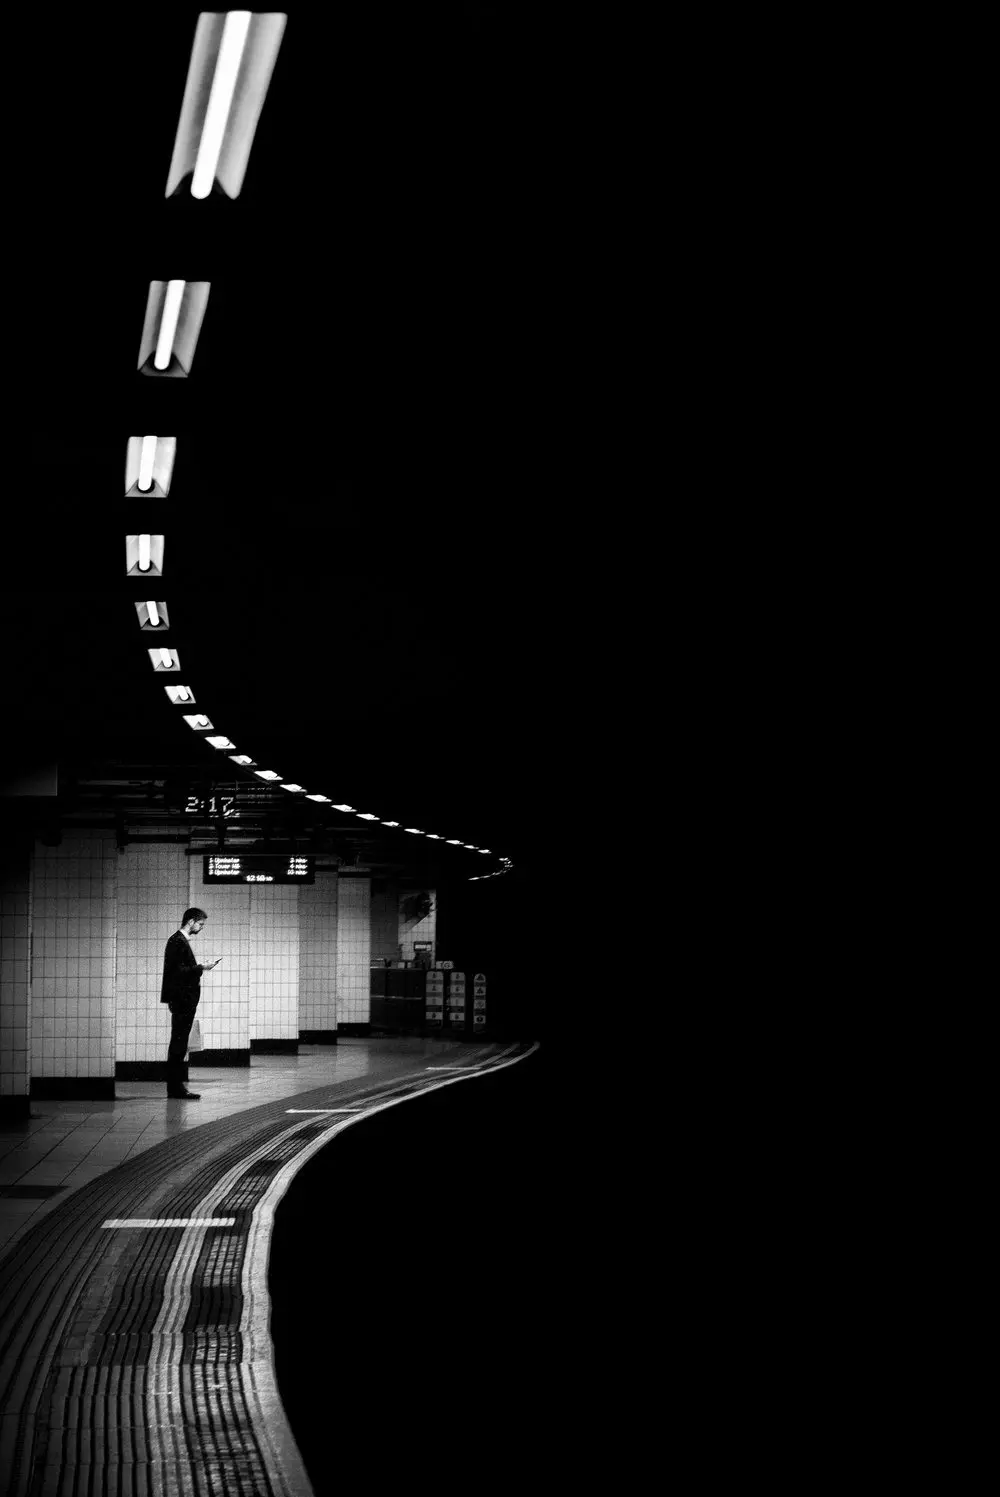 High contrast photography by Alan Schaller